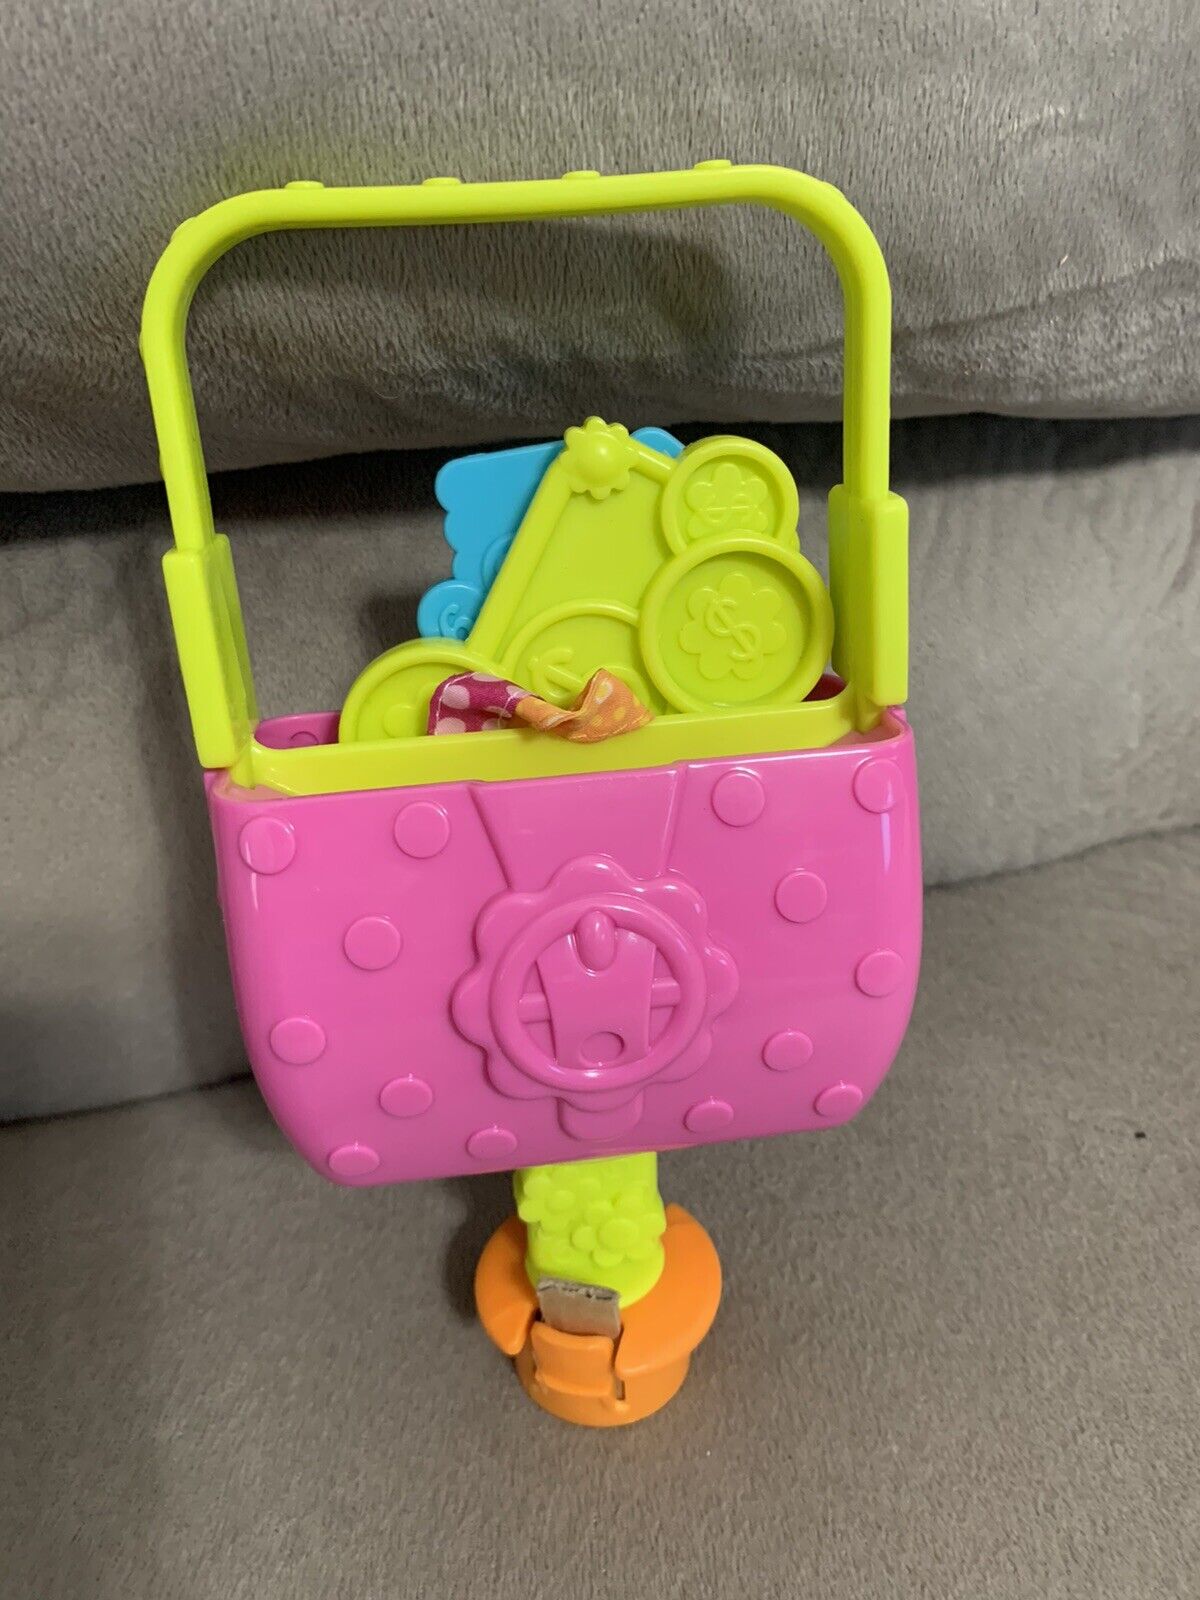 Evenflo New Exersaucer Purse Teethers Toy Replacement Part Switch A Roo Extra